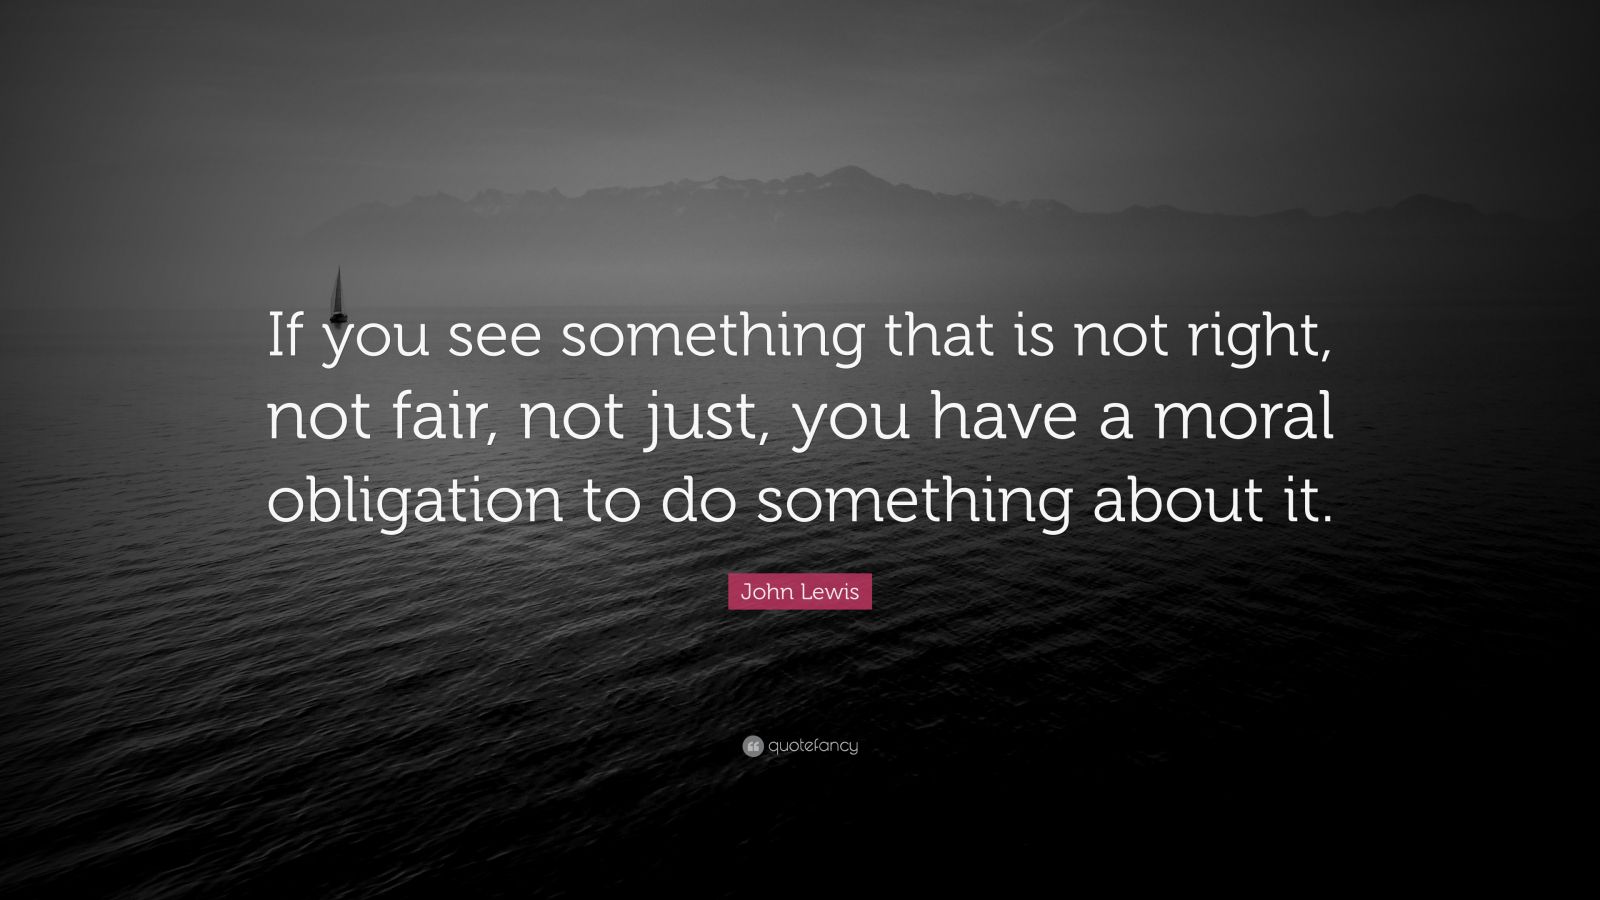 John Lewis Quote If you see something that is  not right 